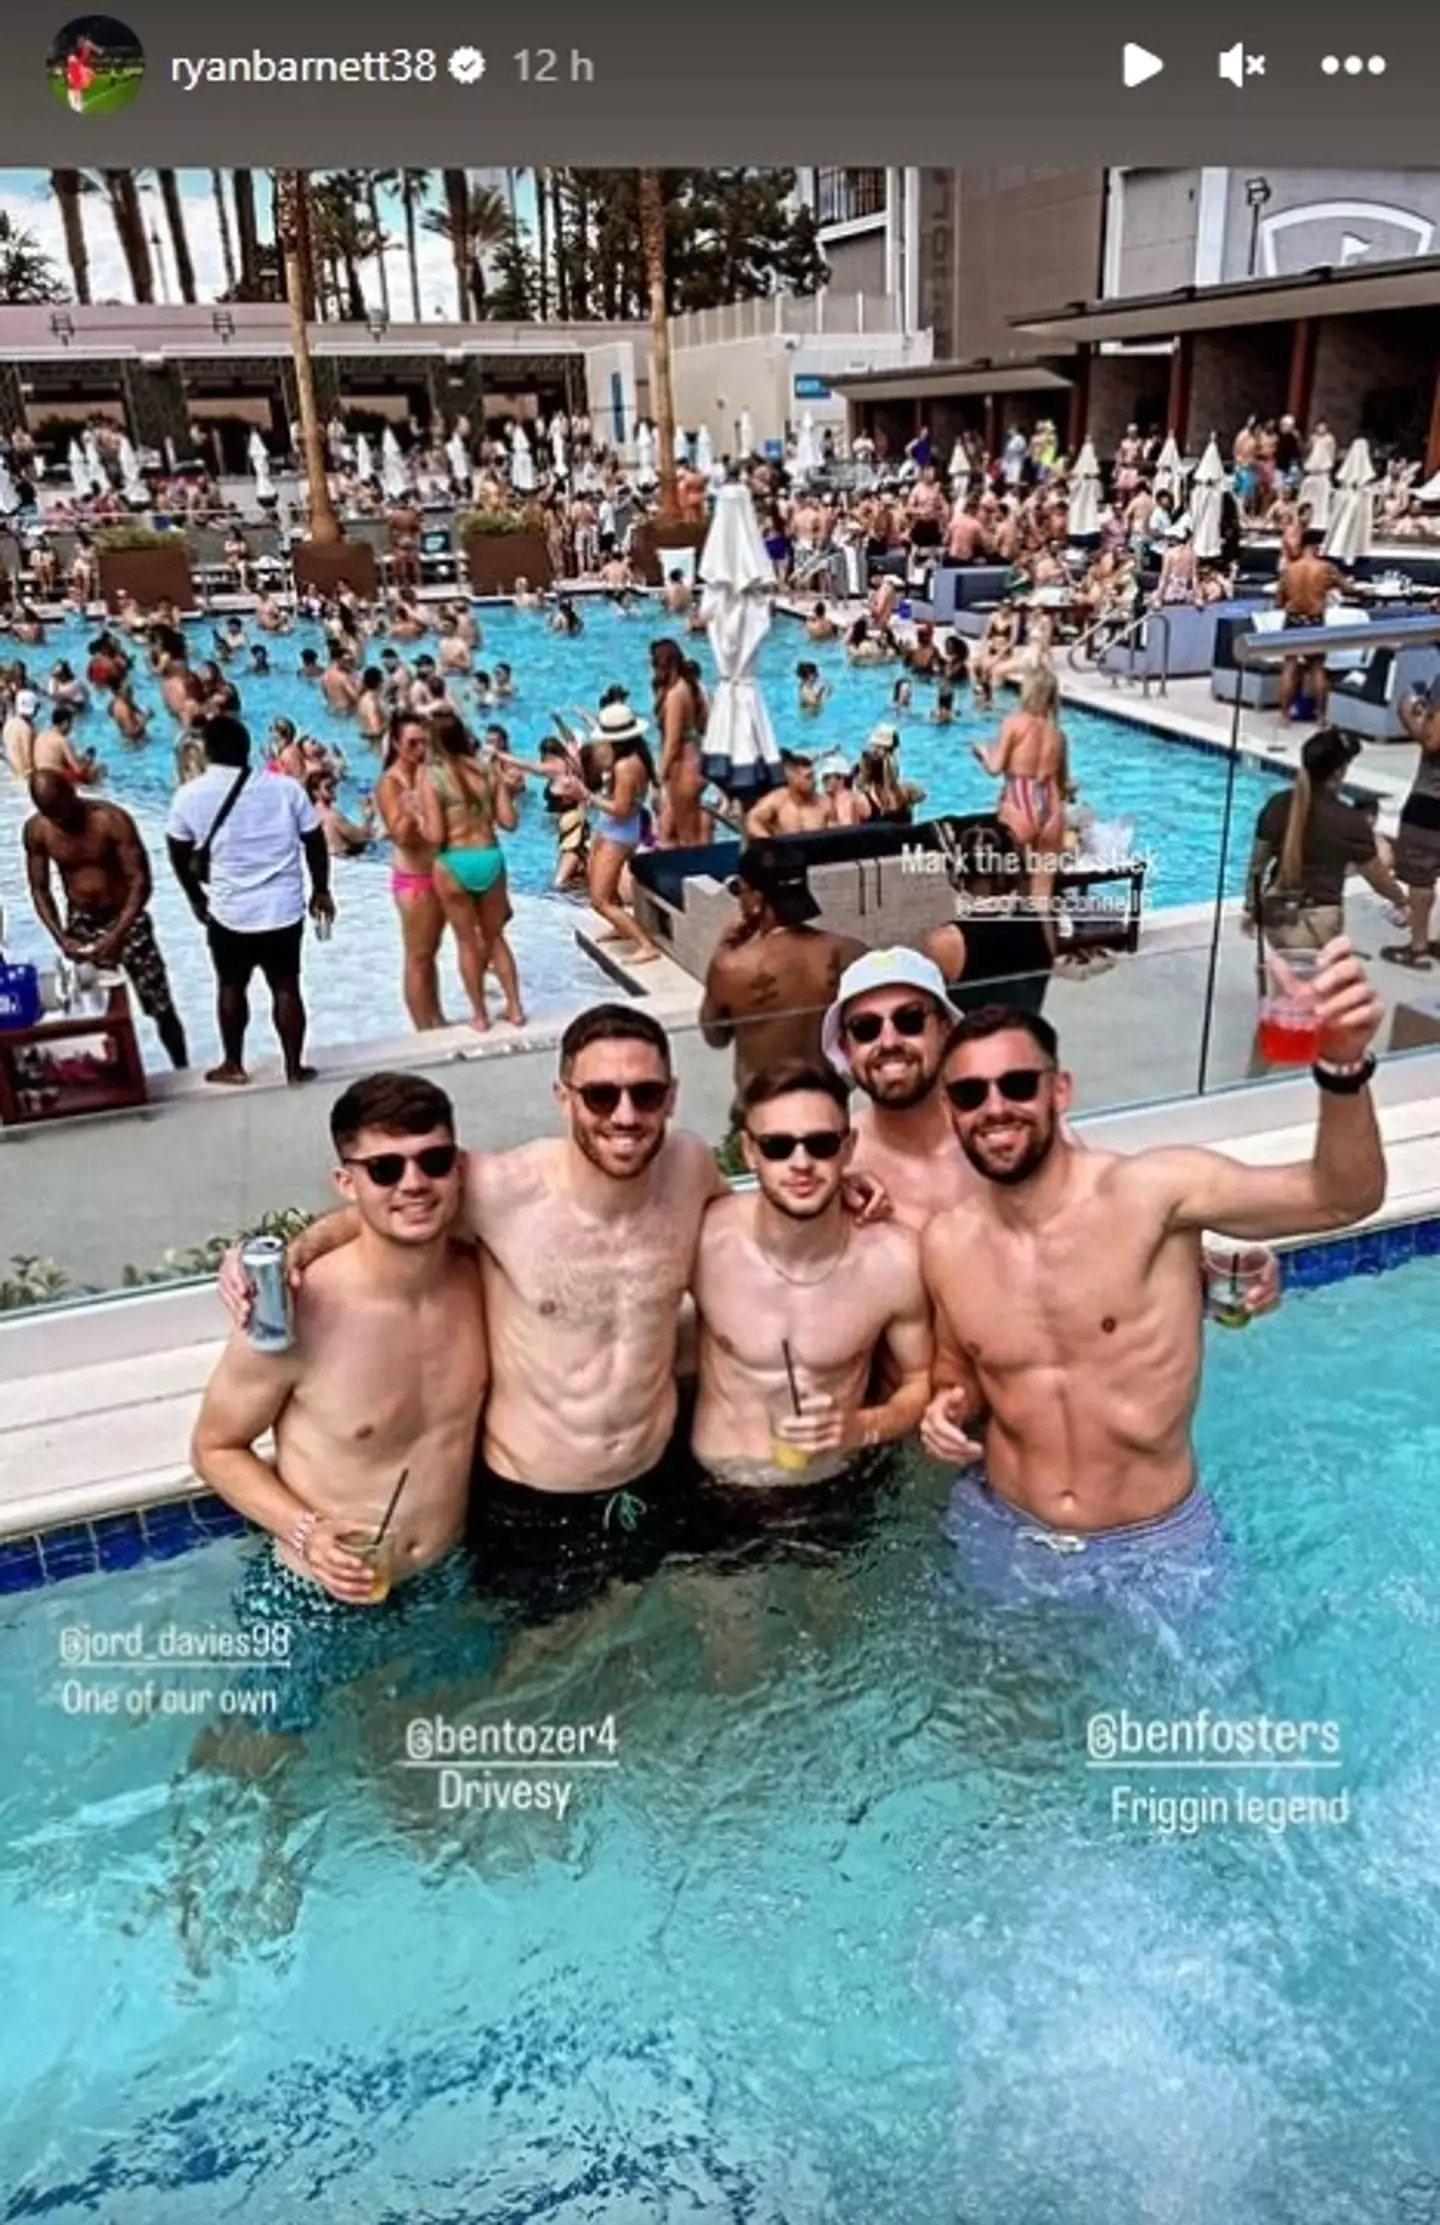 Some of the Wrexham lads enjoying a pool party.